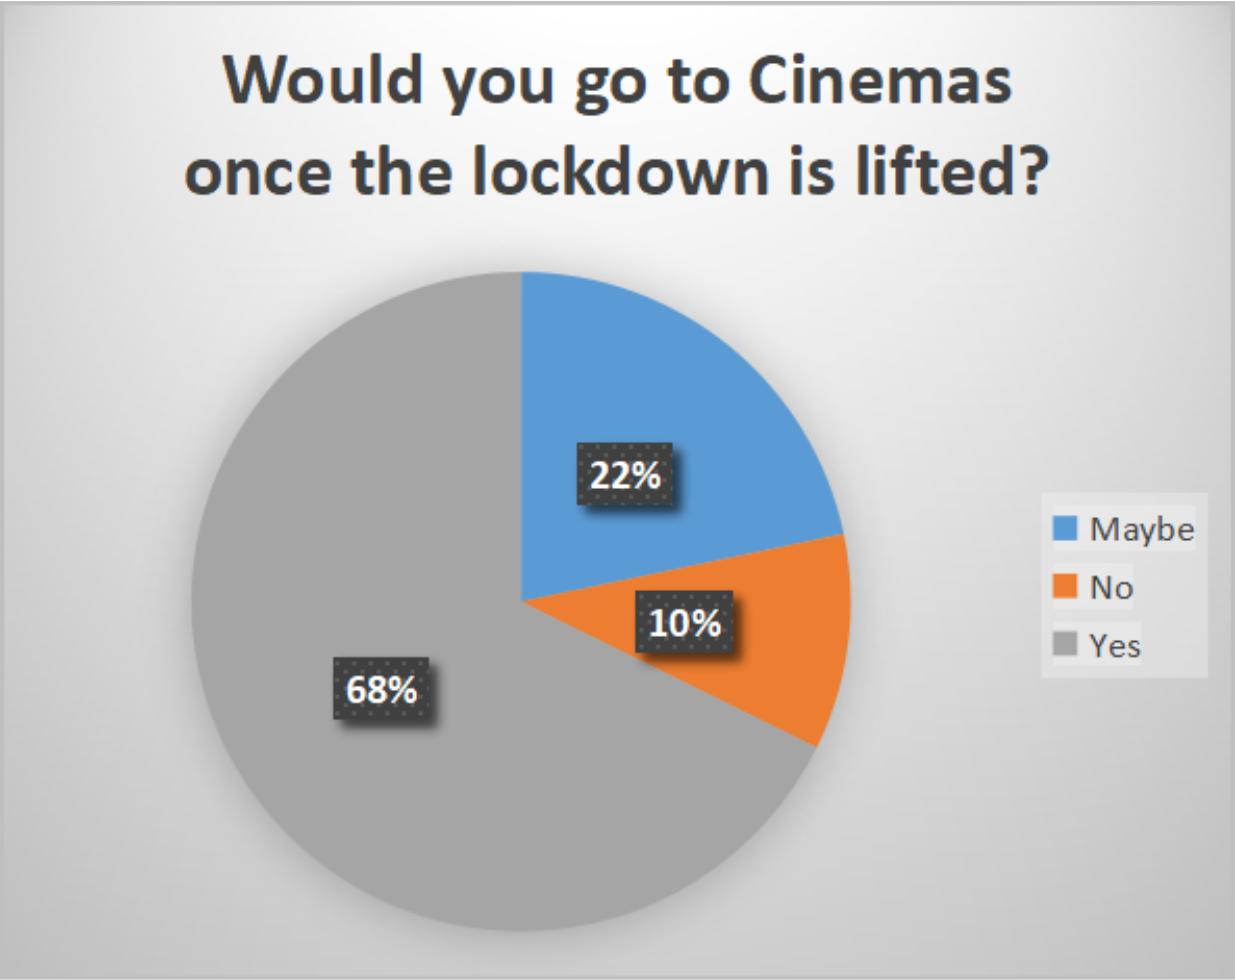 Would you go to Cinemas once the lockdown is lifted